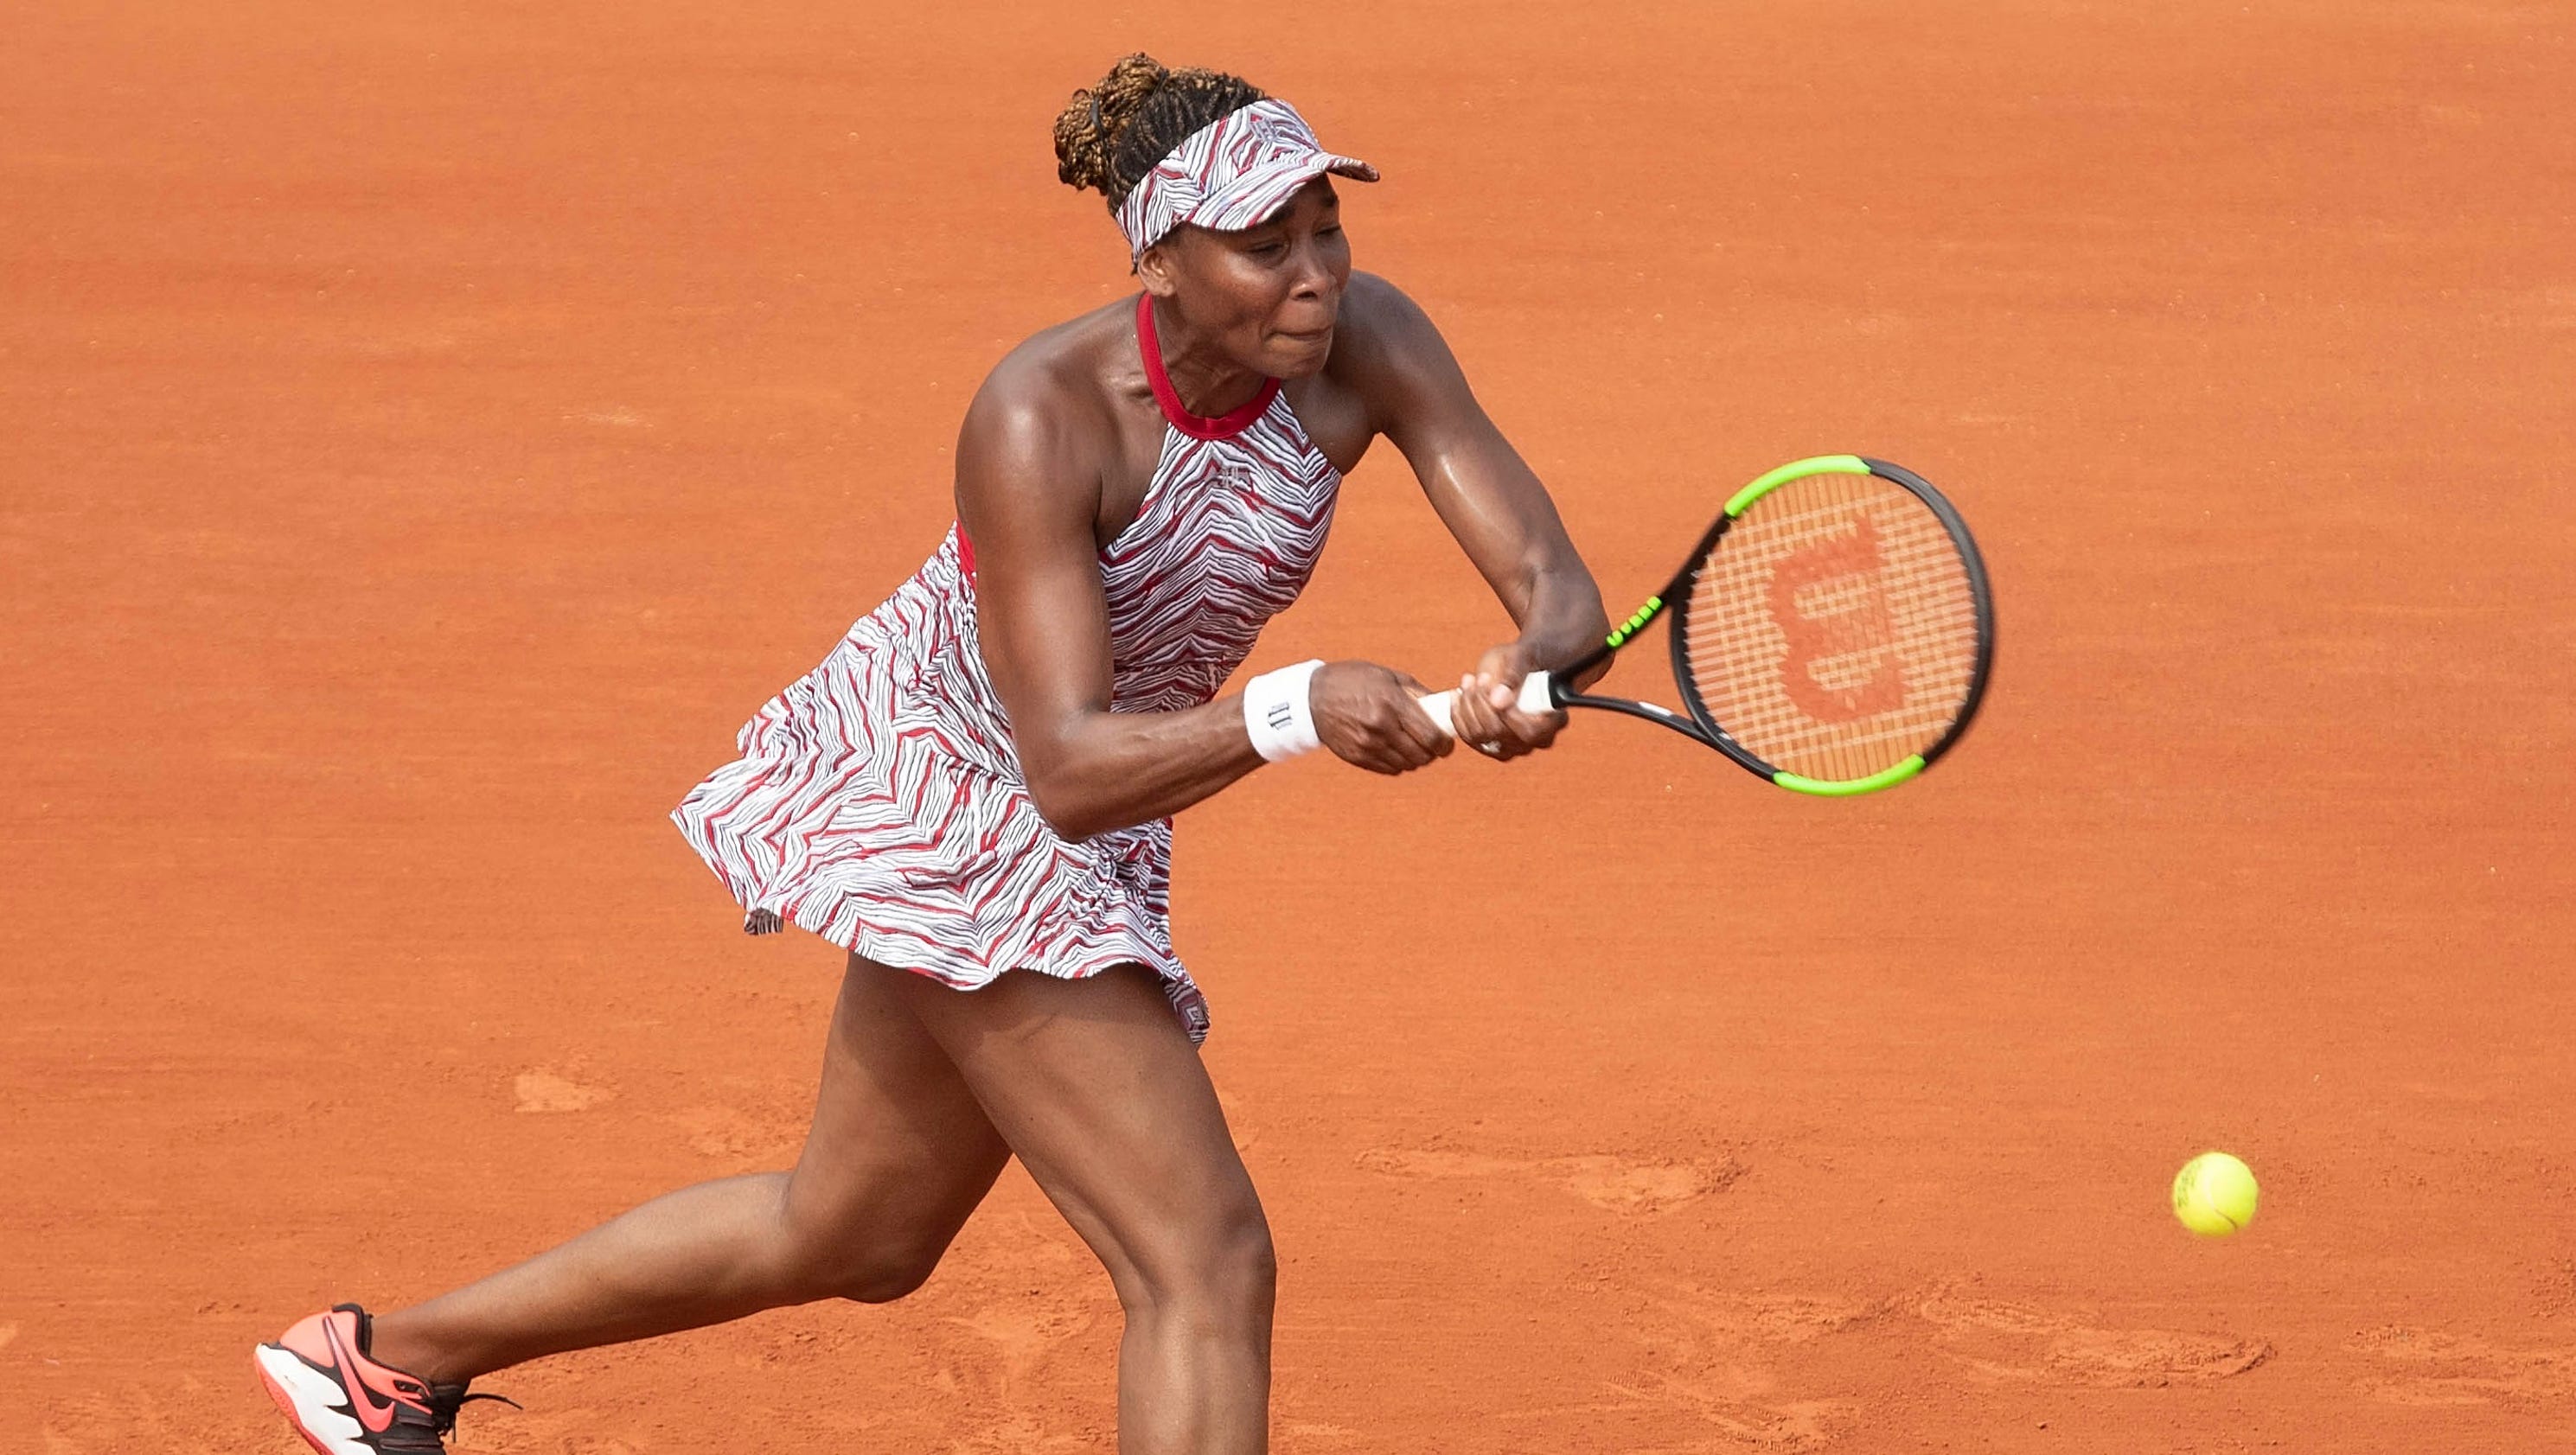 Sloane Stephens, Grigor Dimitrov advance at French Open; Venus Williams out